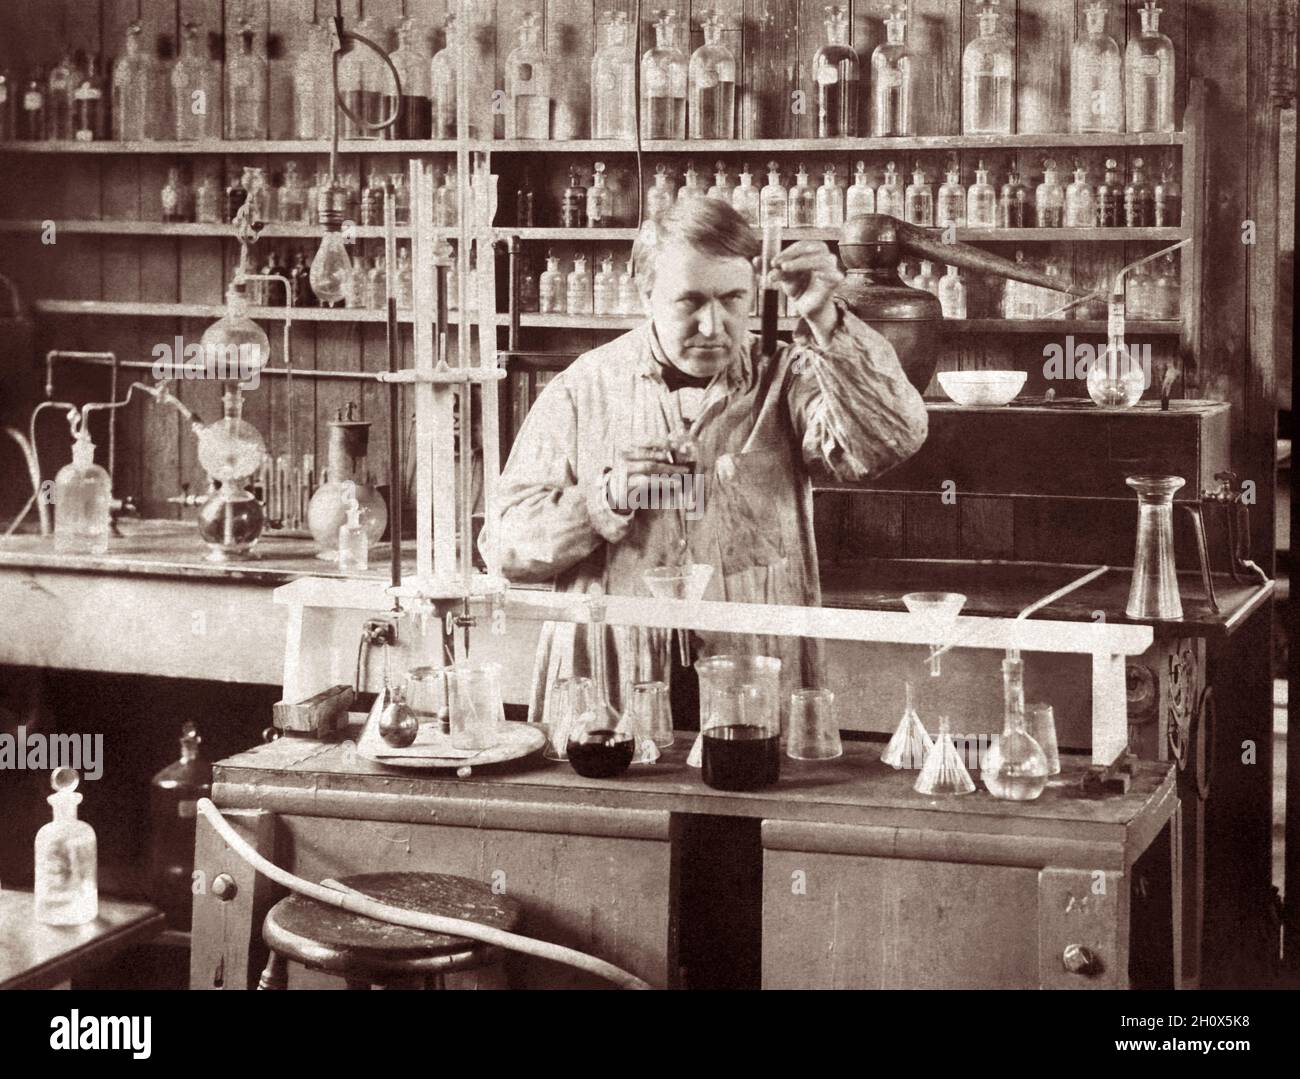 Thomas Alva Edison (1847–1931), who has been described as America's greatest inventor, working in the Chemical Department building in his West Orange, New Jersey, laboratory complex in 1890. (USA) Stock Photo